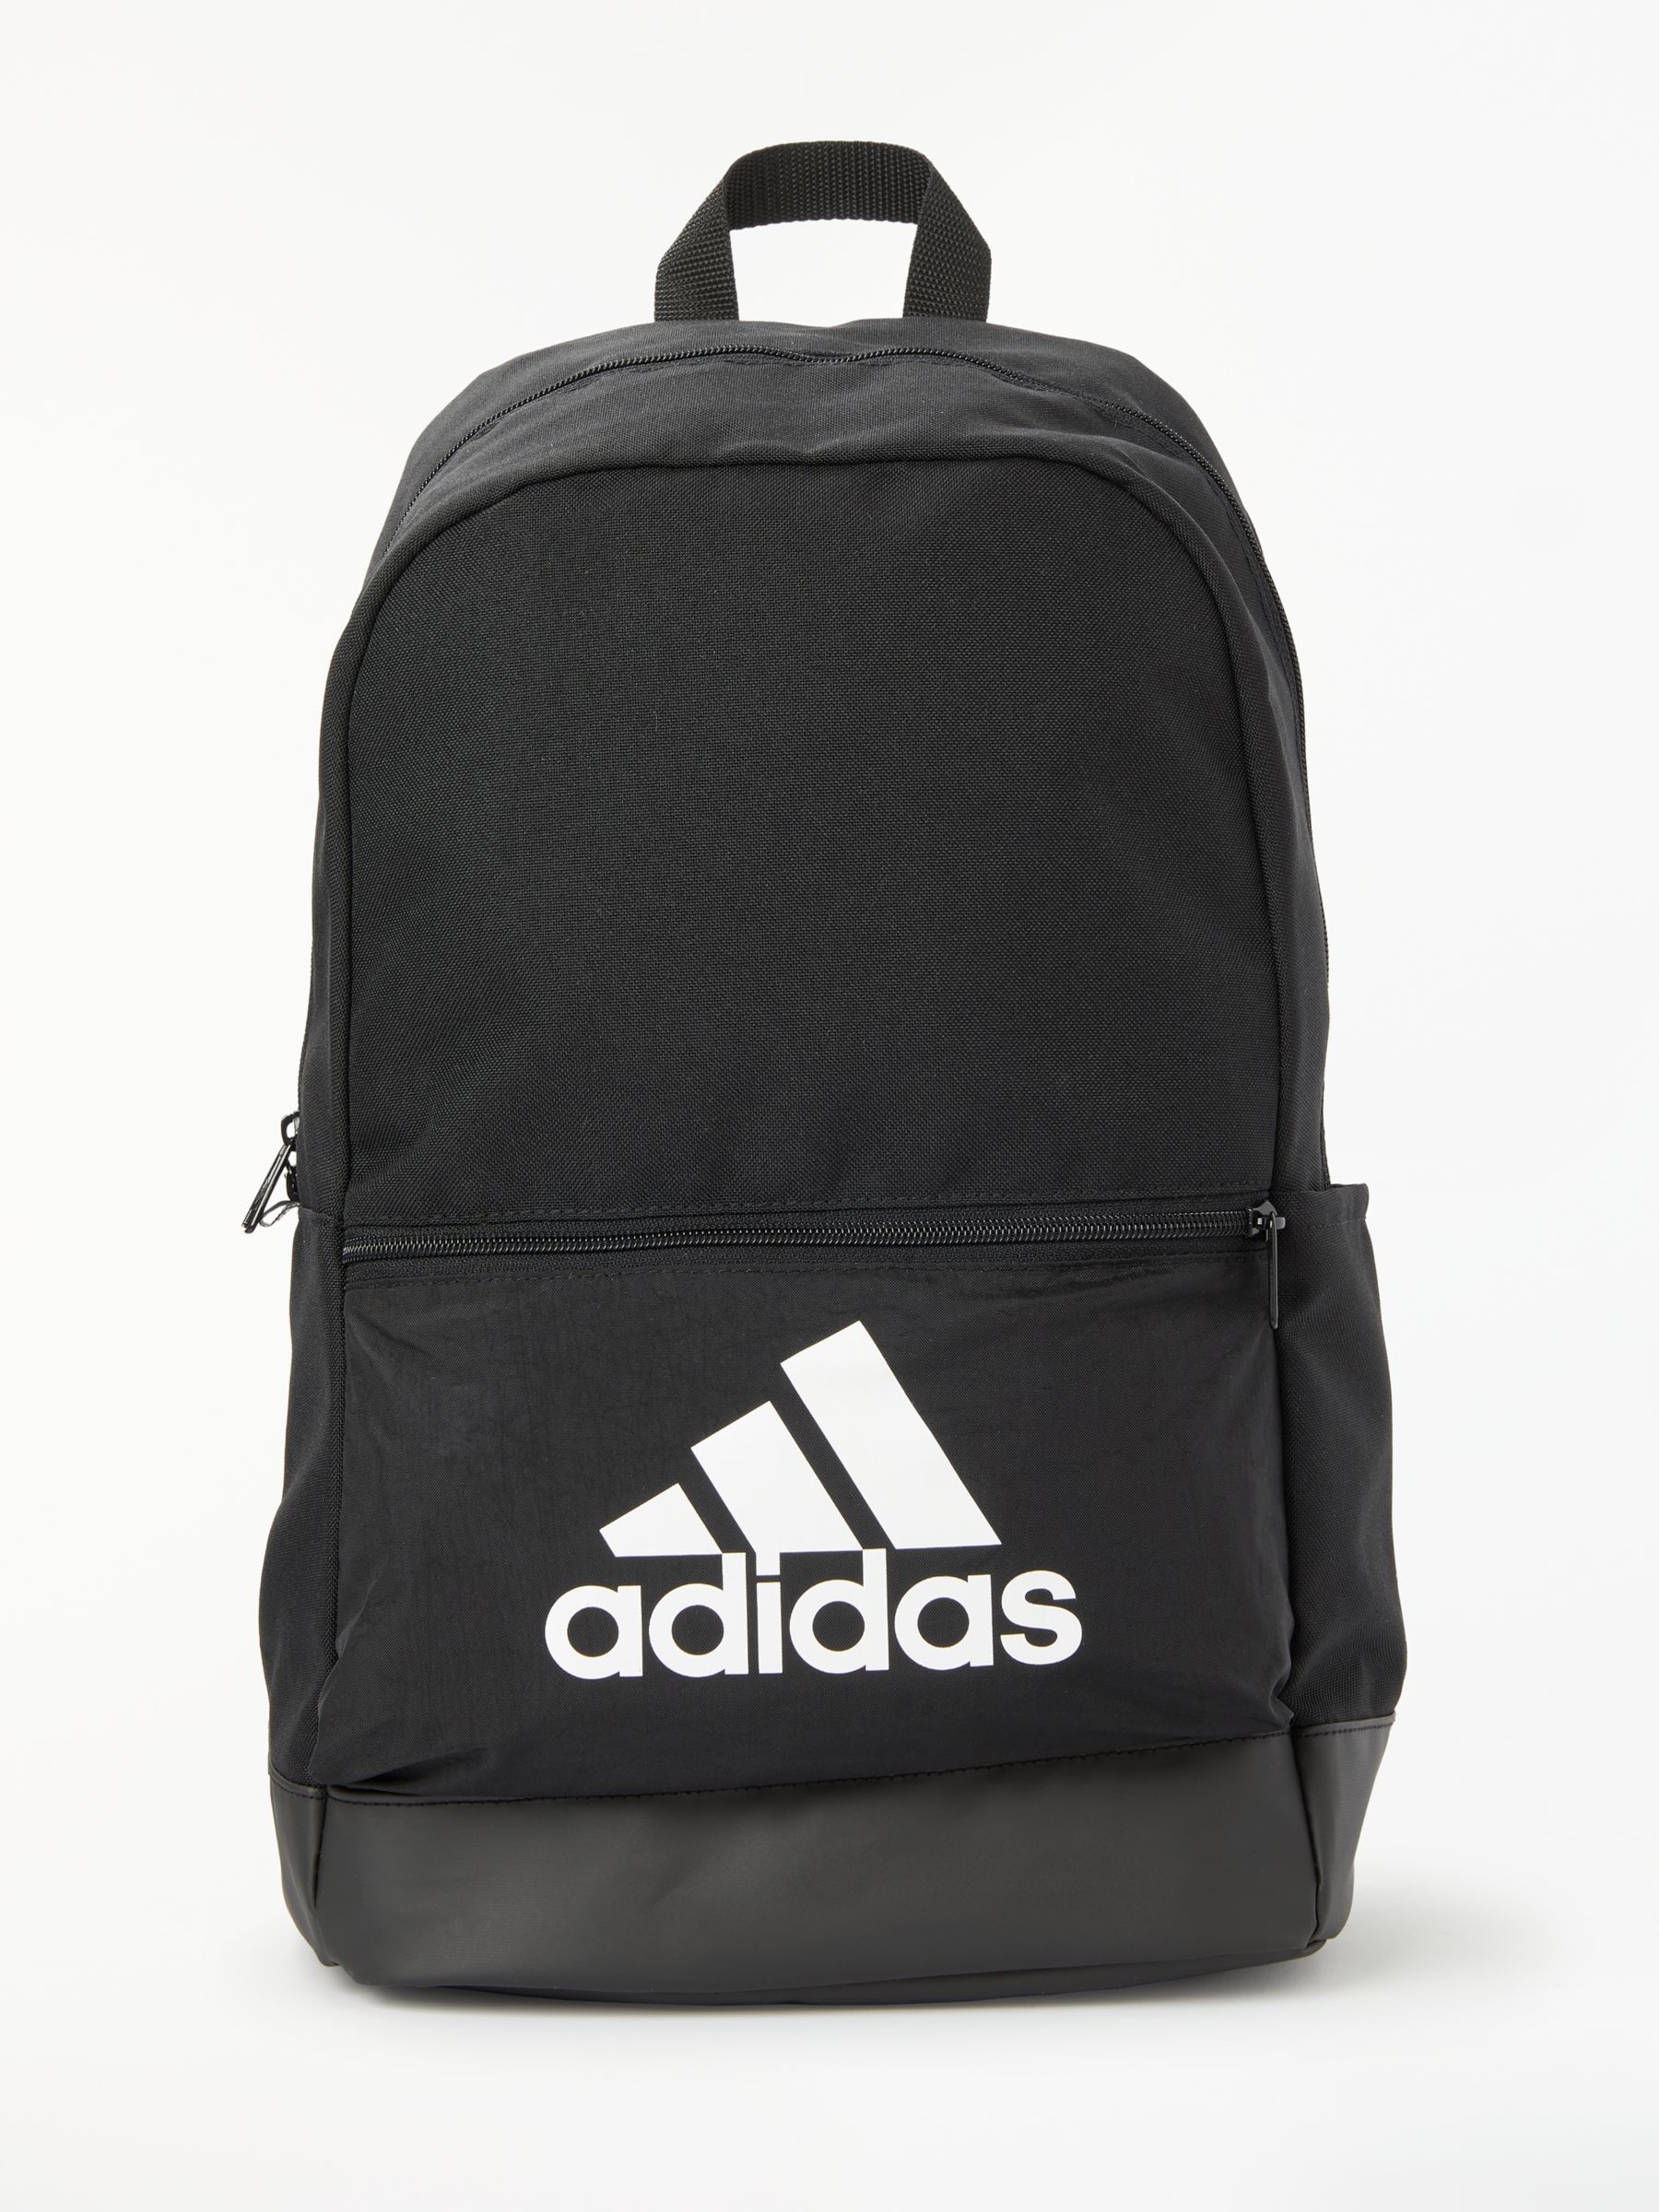 adidas Classic Badge of Sport Backpack, Black/White at John Lewis & Partners